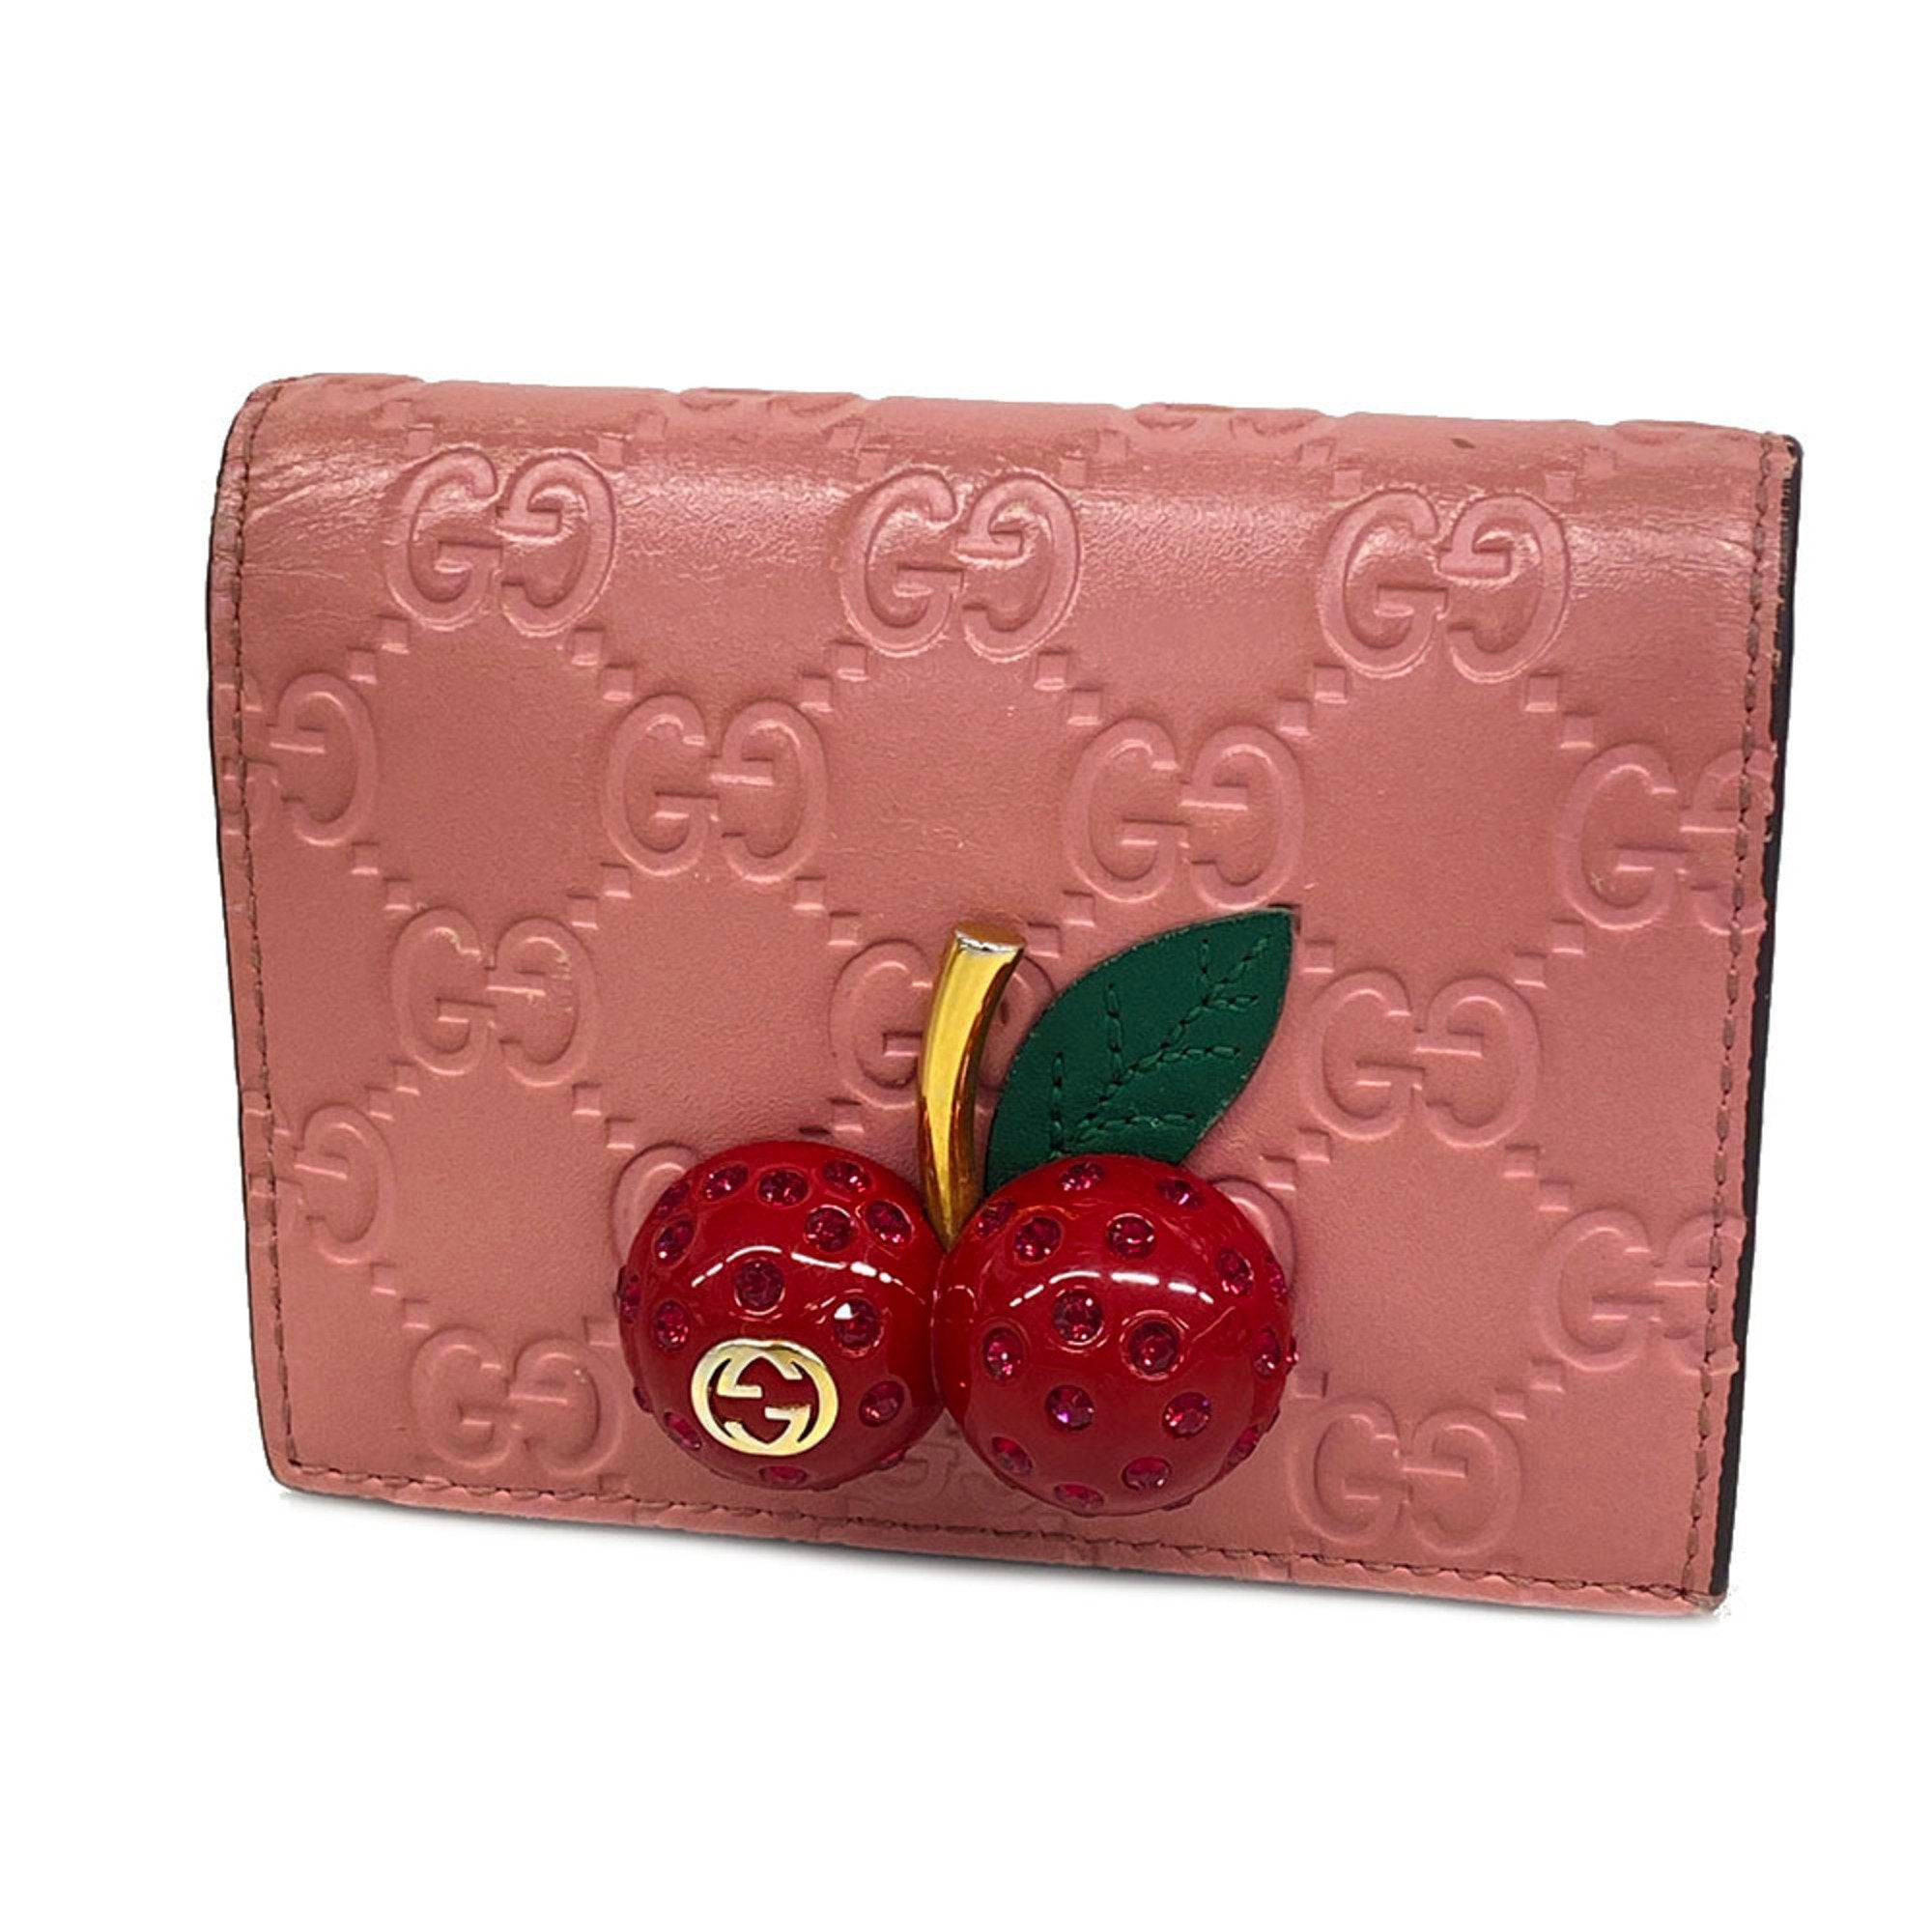 Wallet Ssima Cherry 476050 1147 Leather Pink Women's